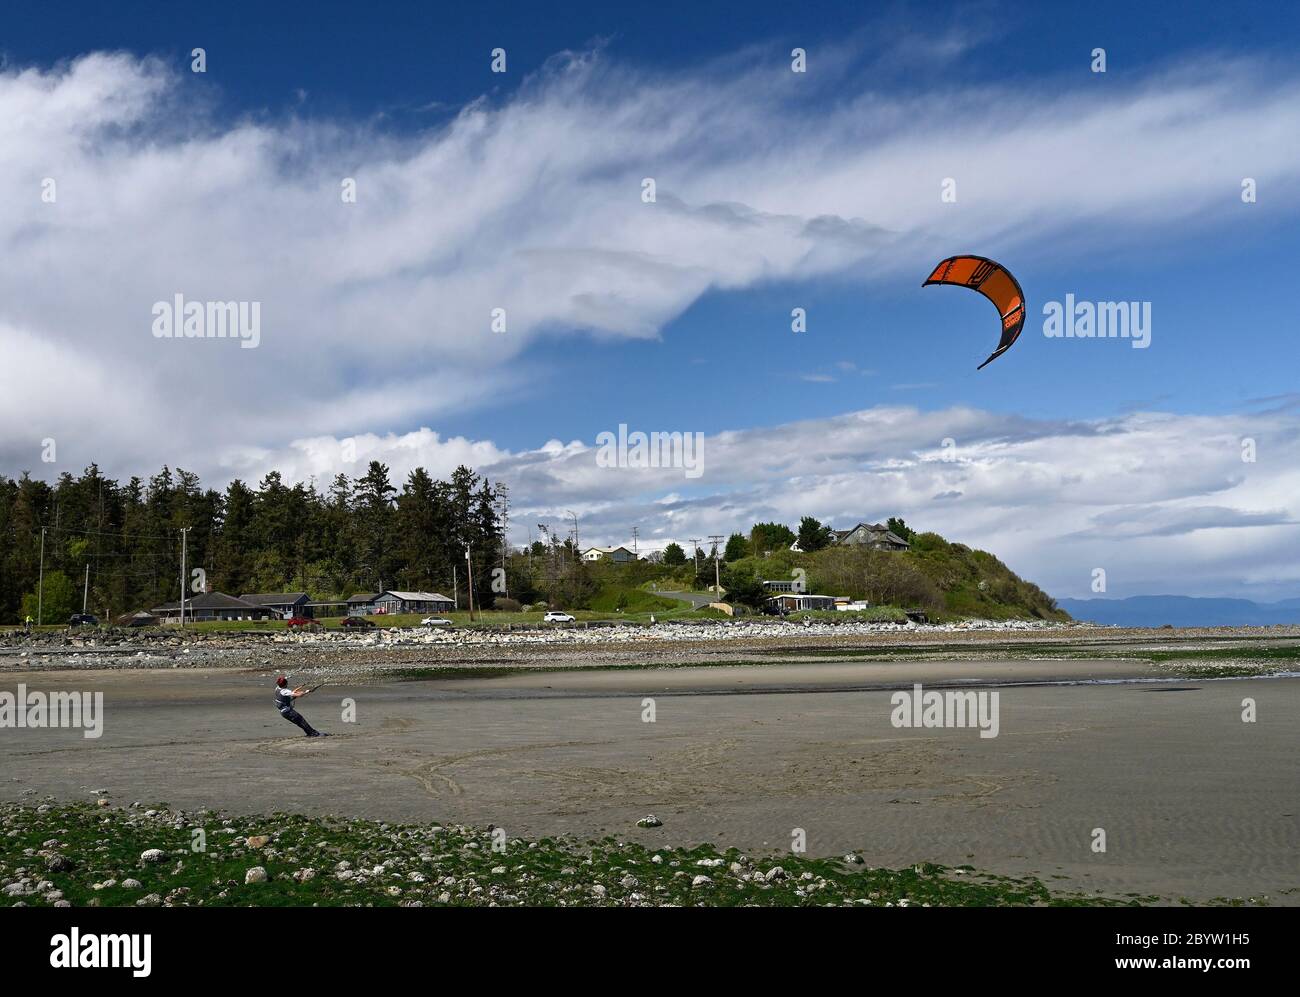 Practicing wind surfing on a sandy beach Point Holmes, Comox Valley, Vancouver Island, B.C Canada Stock Photo